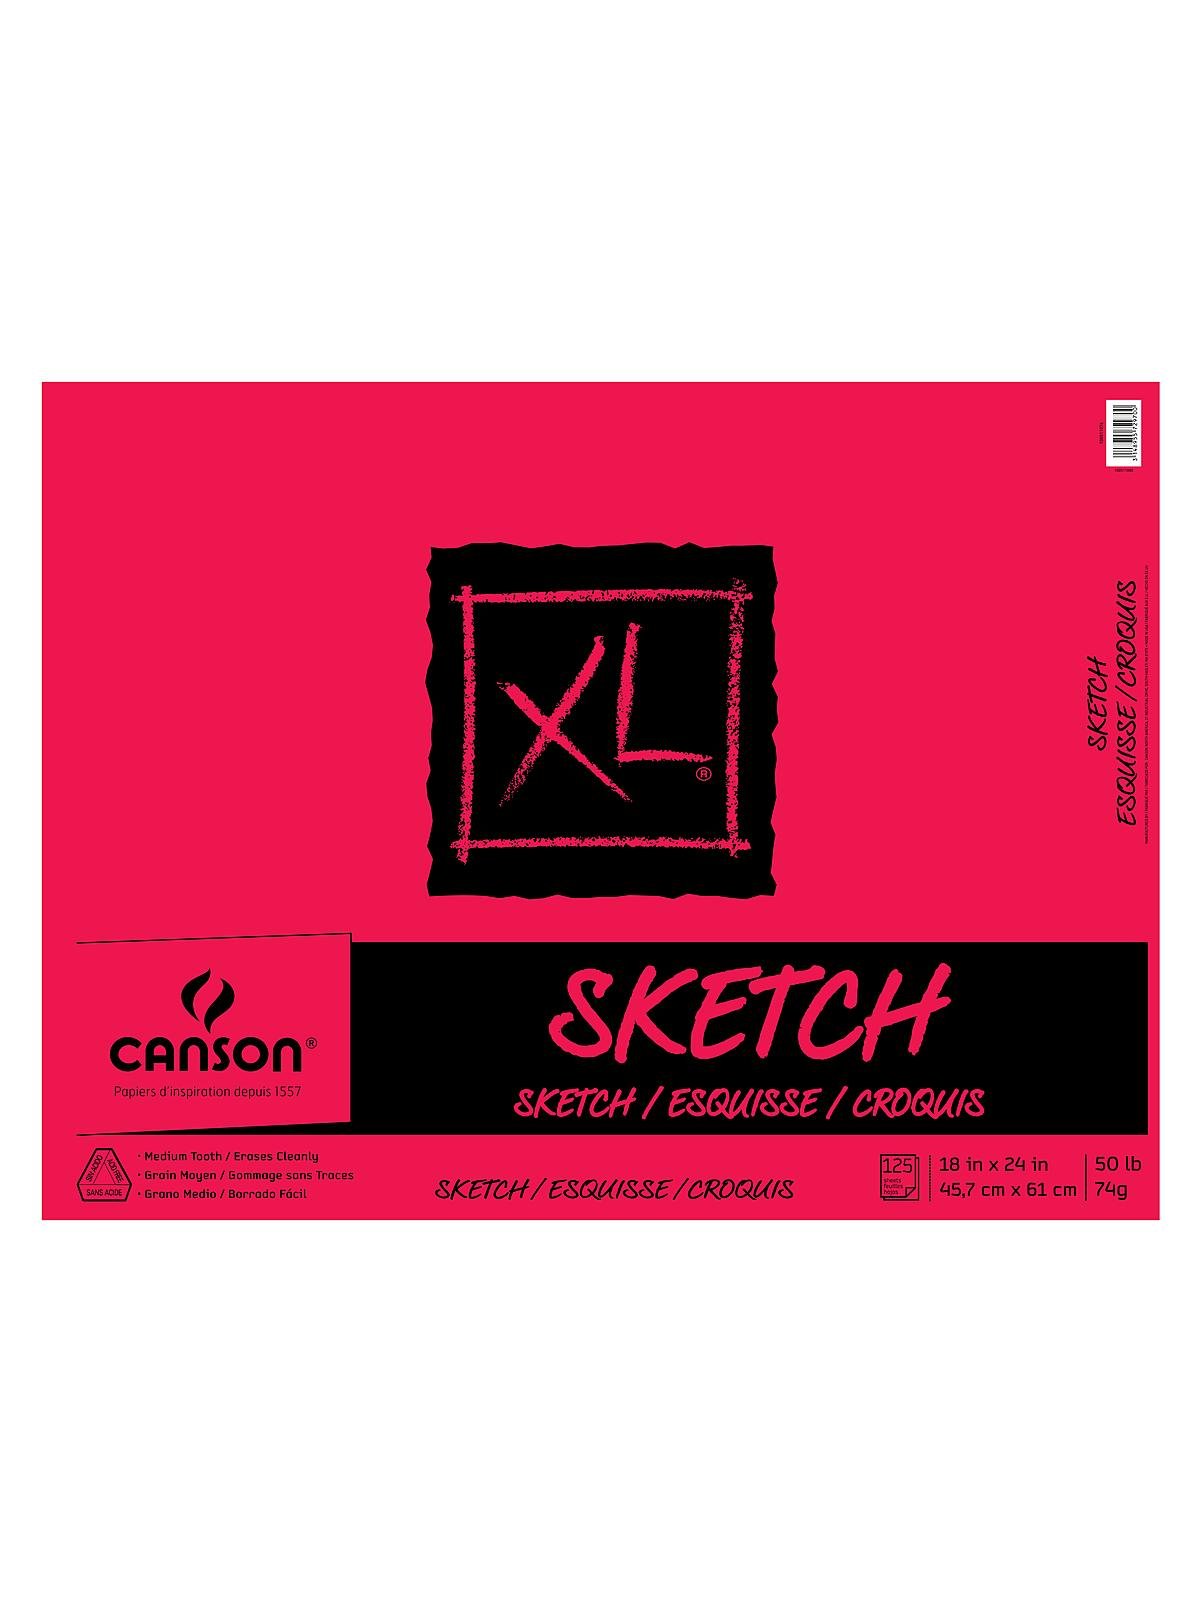 Canson Universal Sketch Pads - FLAX art & design